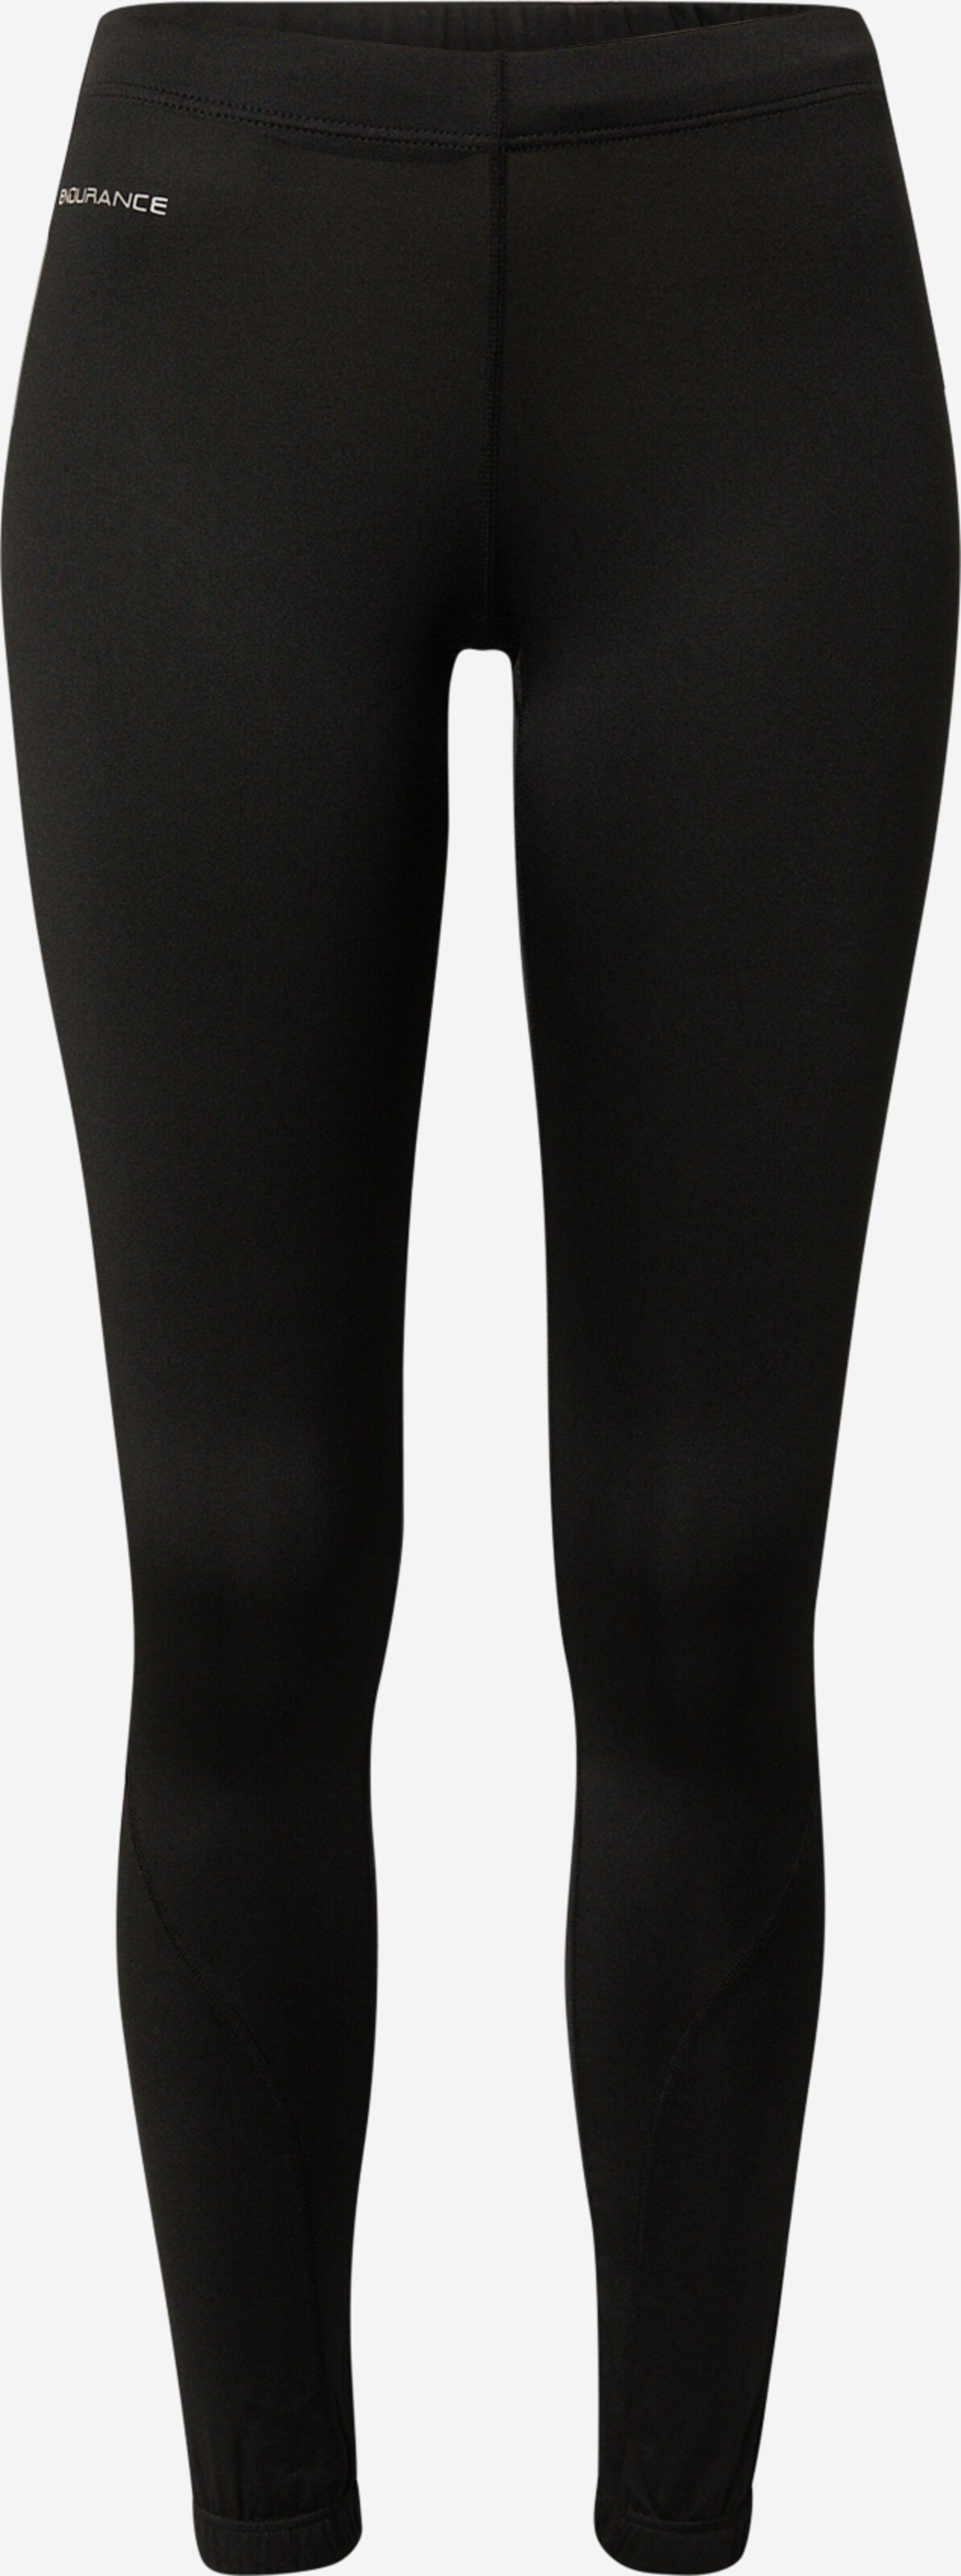 ENDURANCE Skinny Laufhose 'Valence' in Schwarz | ABOUT YOU